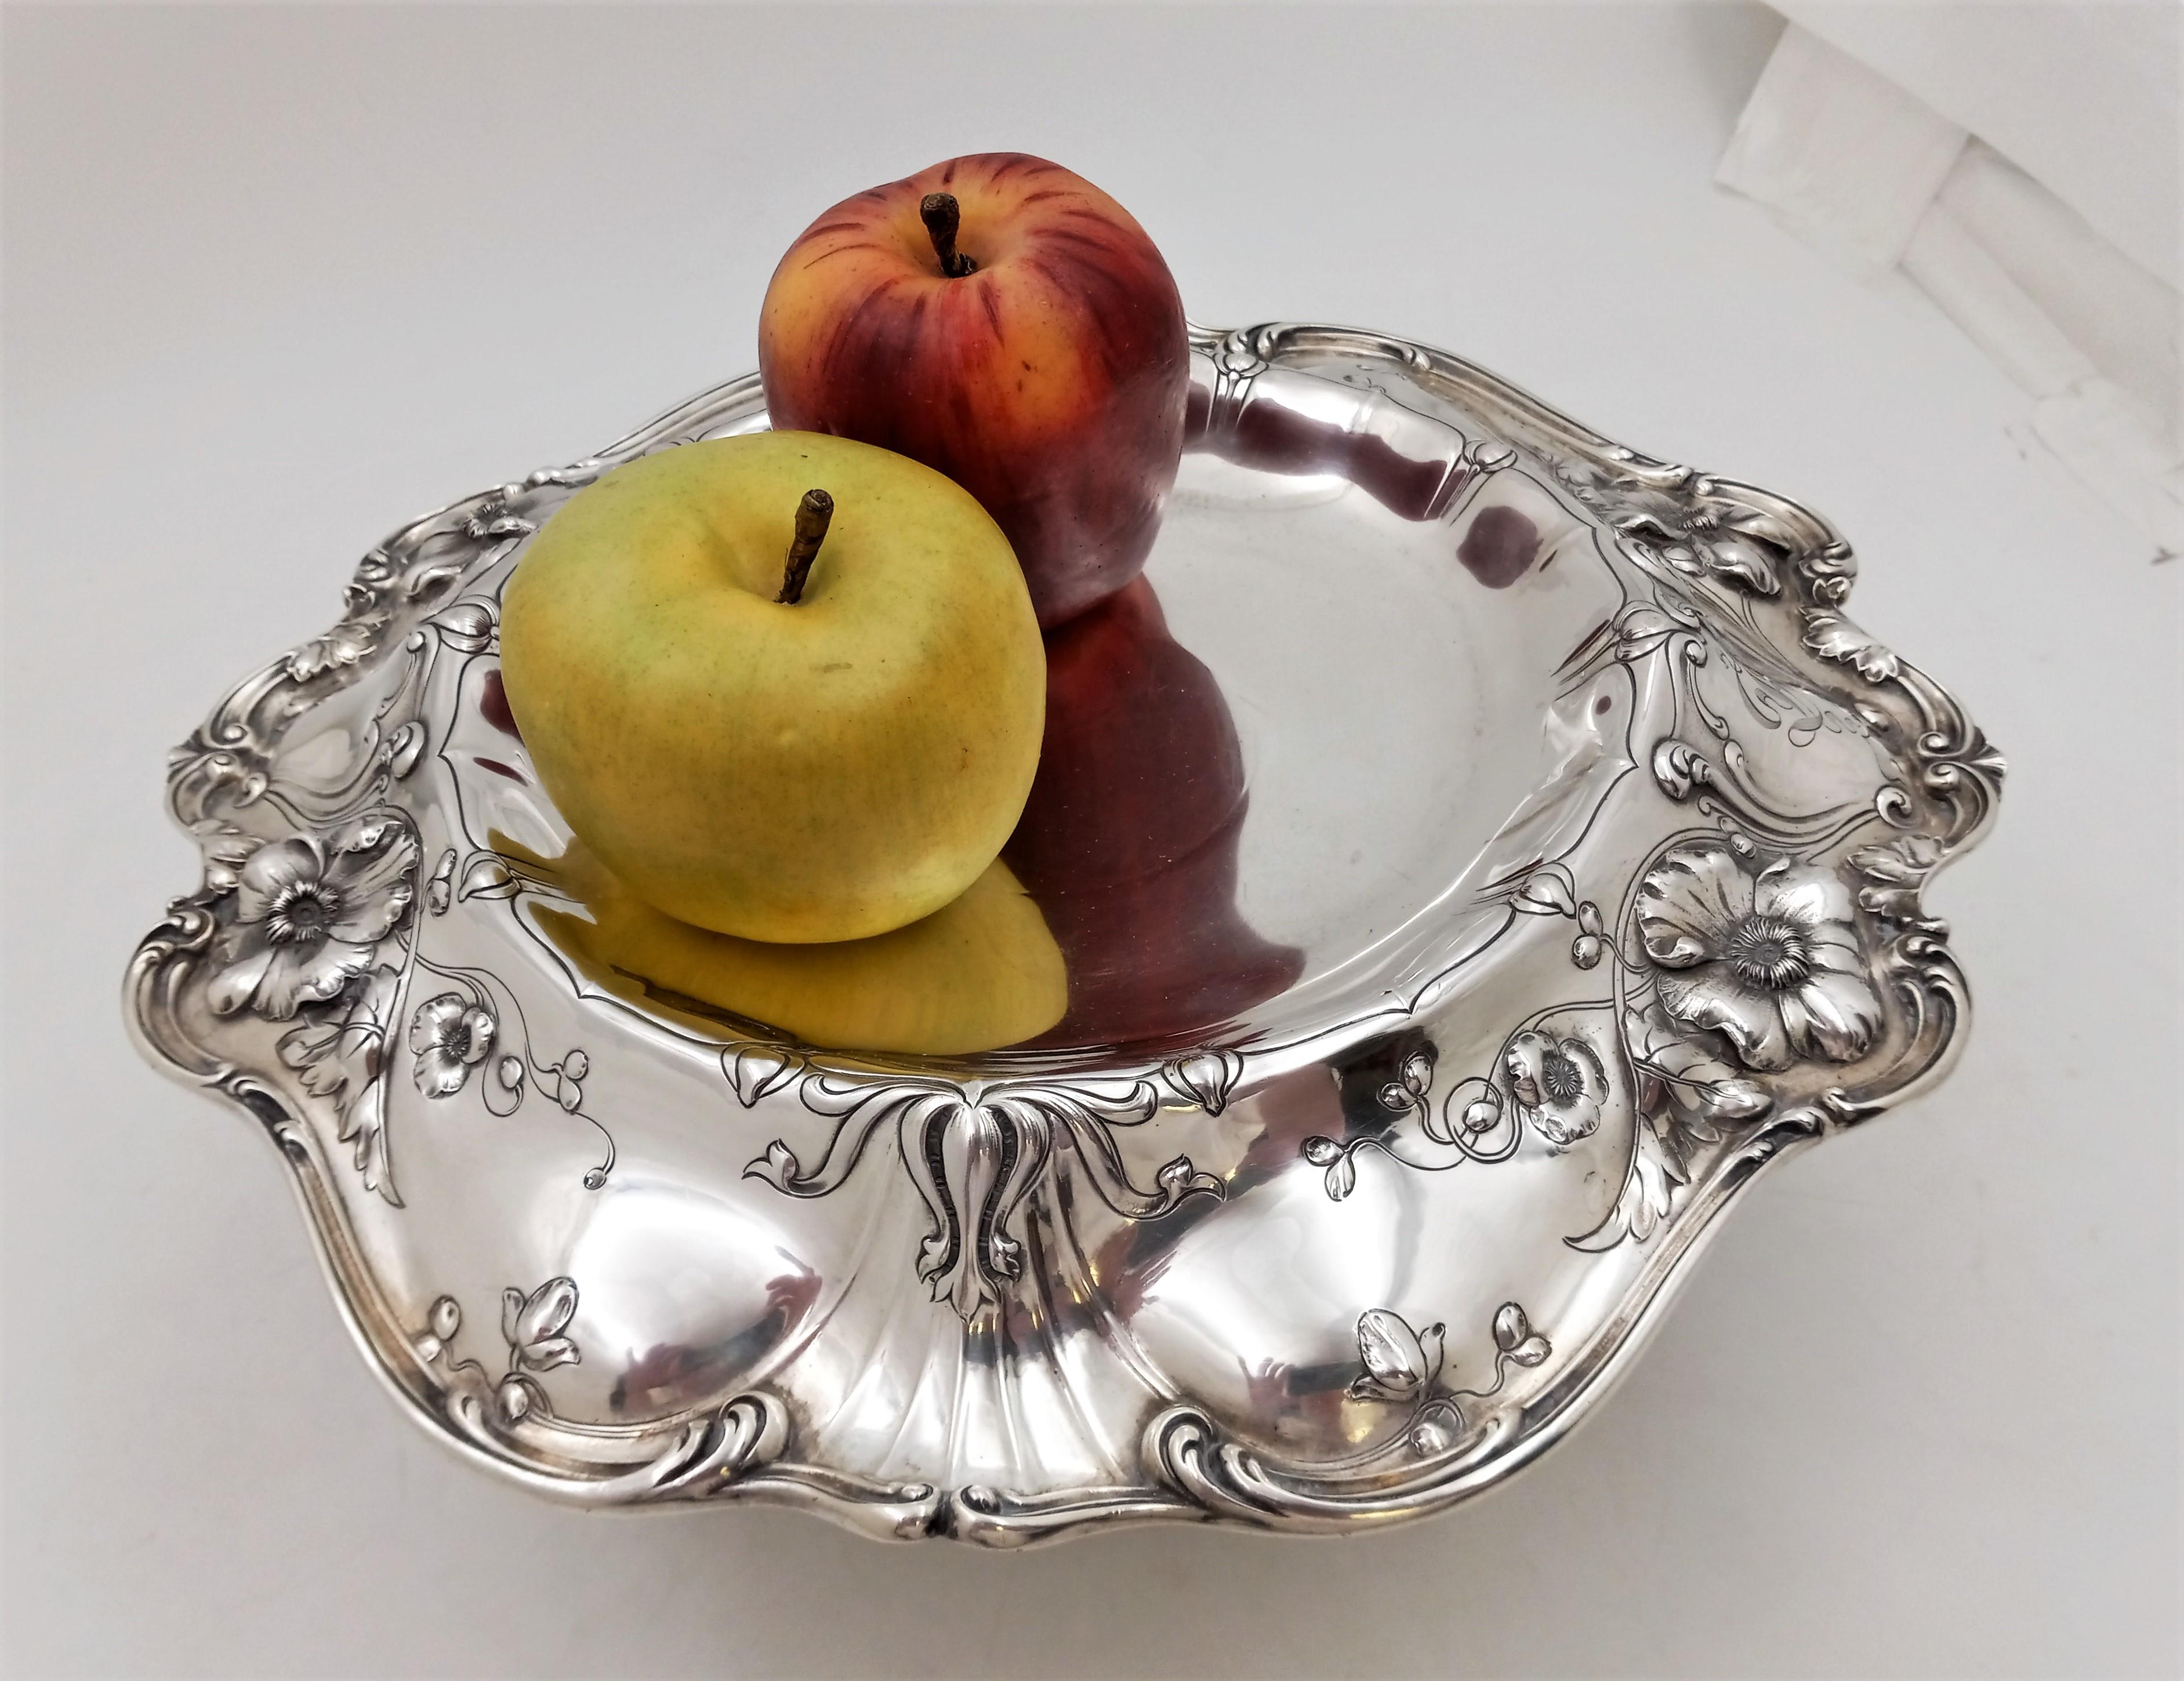 Reed & Barton sterling silver compote serving bowl in Art Nouveau style, possibly in Les Cinq Fleurs pattern. This elegant piece has a beautiful floral design. It measures 6